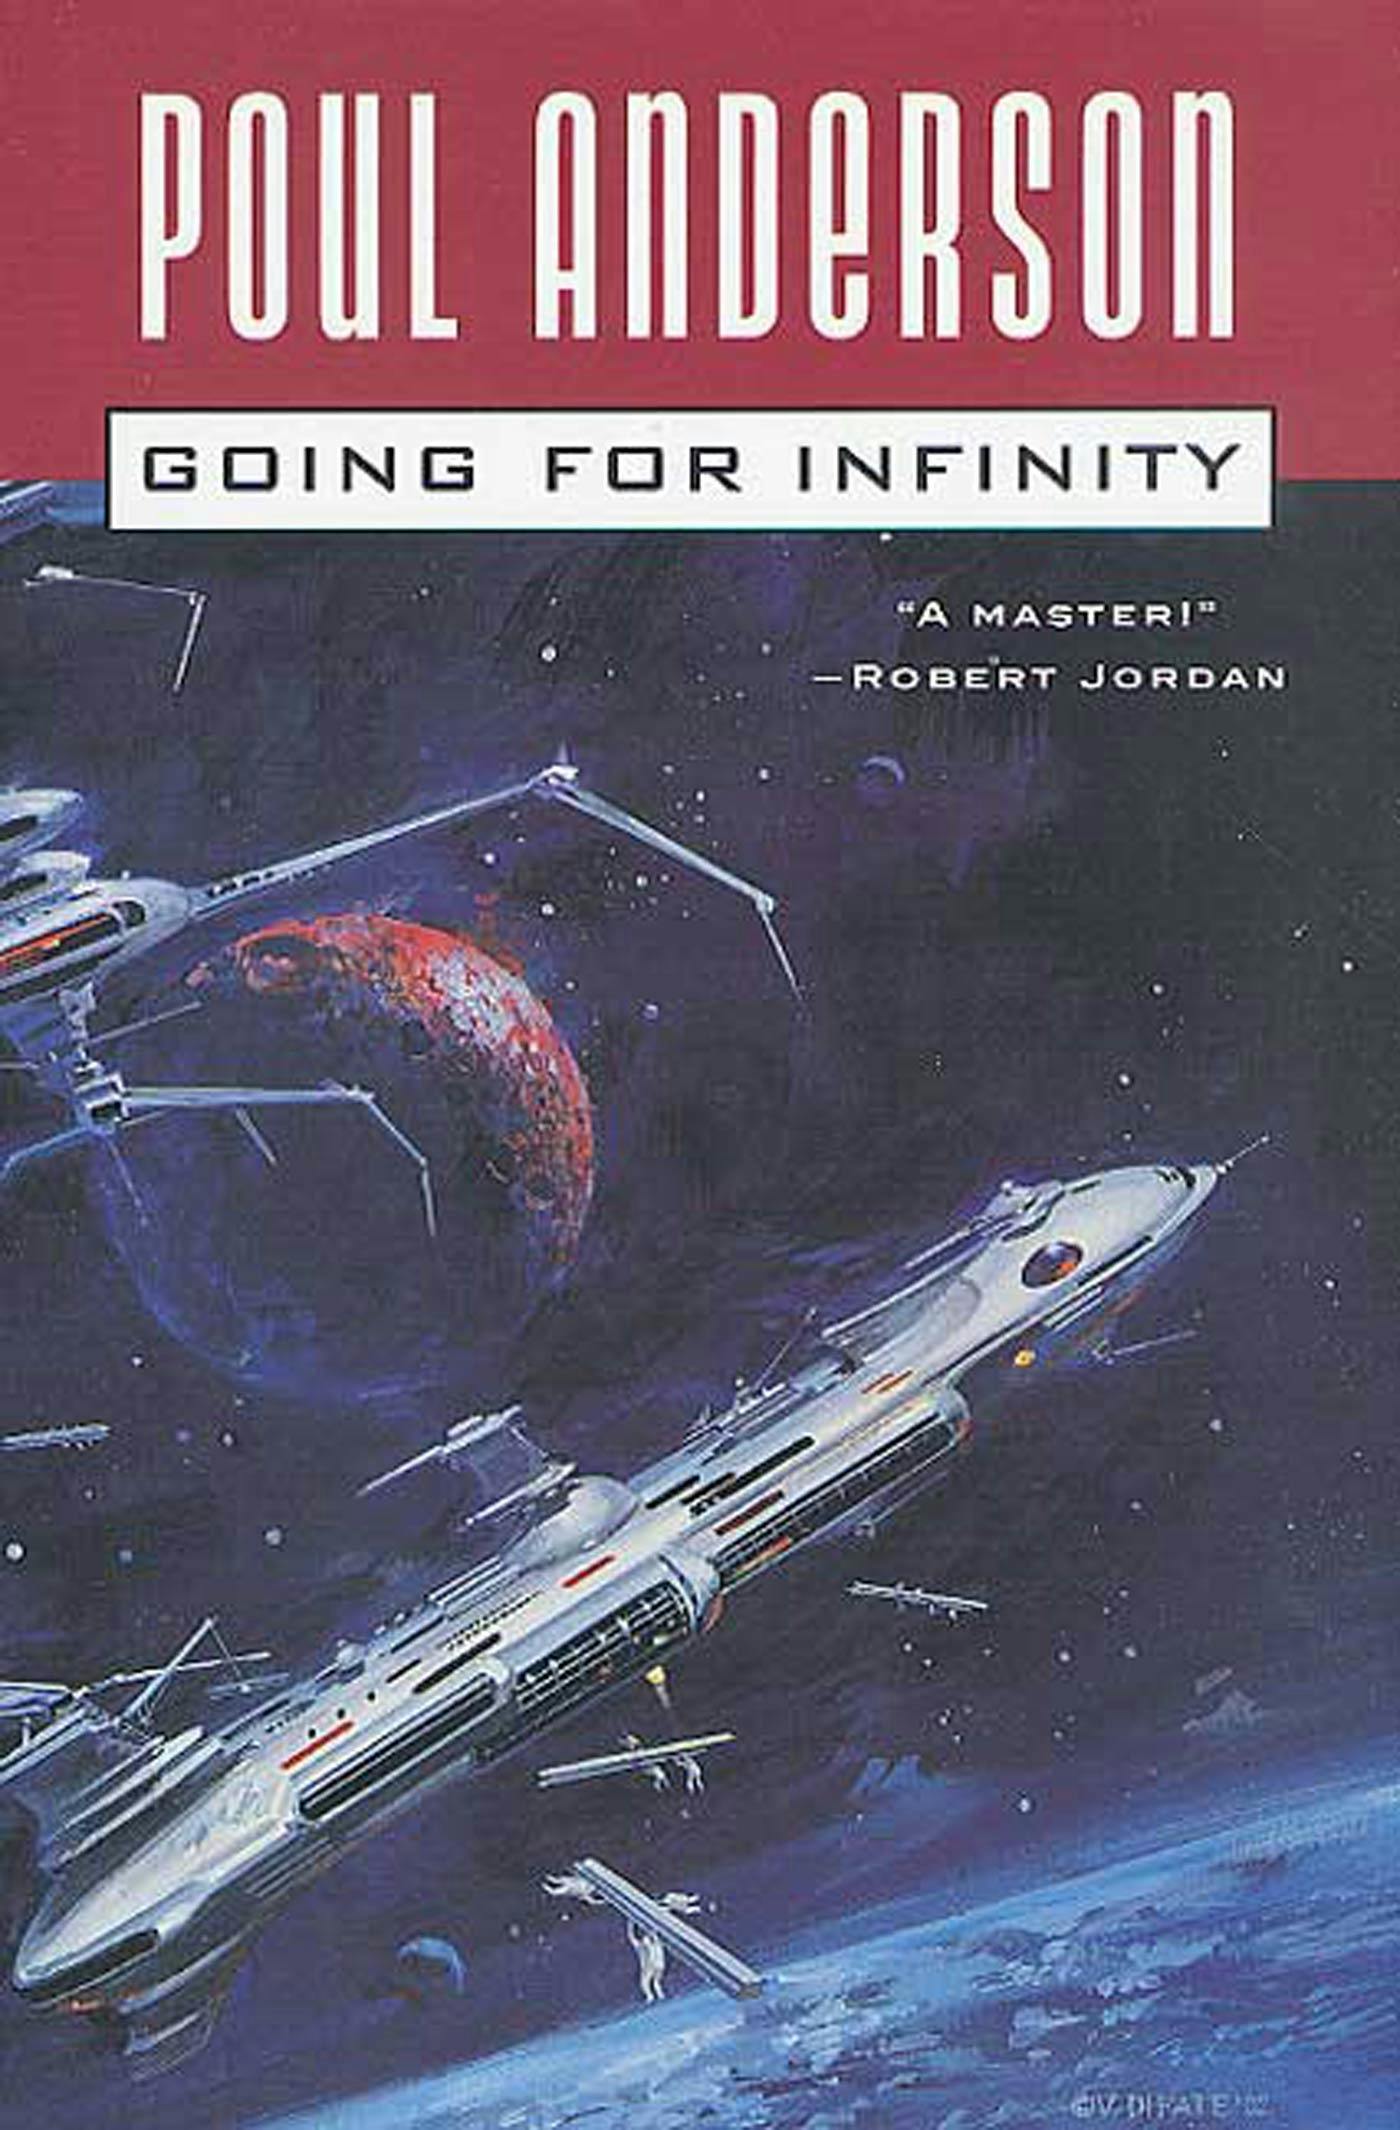 Cover for the book titled as: Going For Infinity